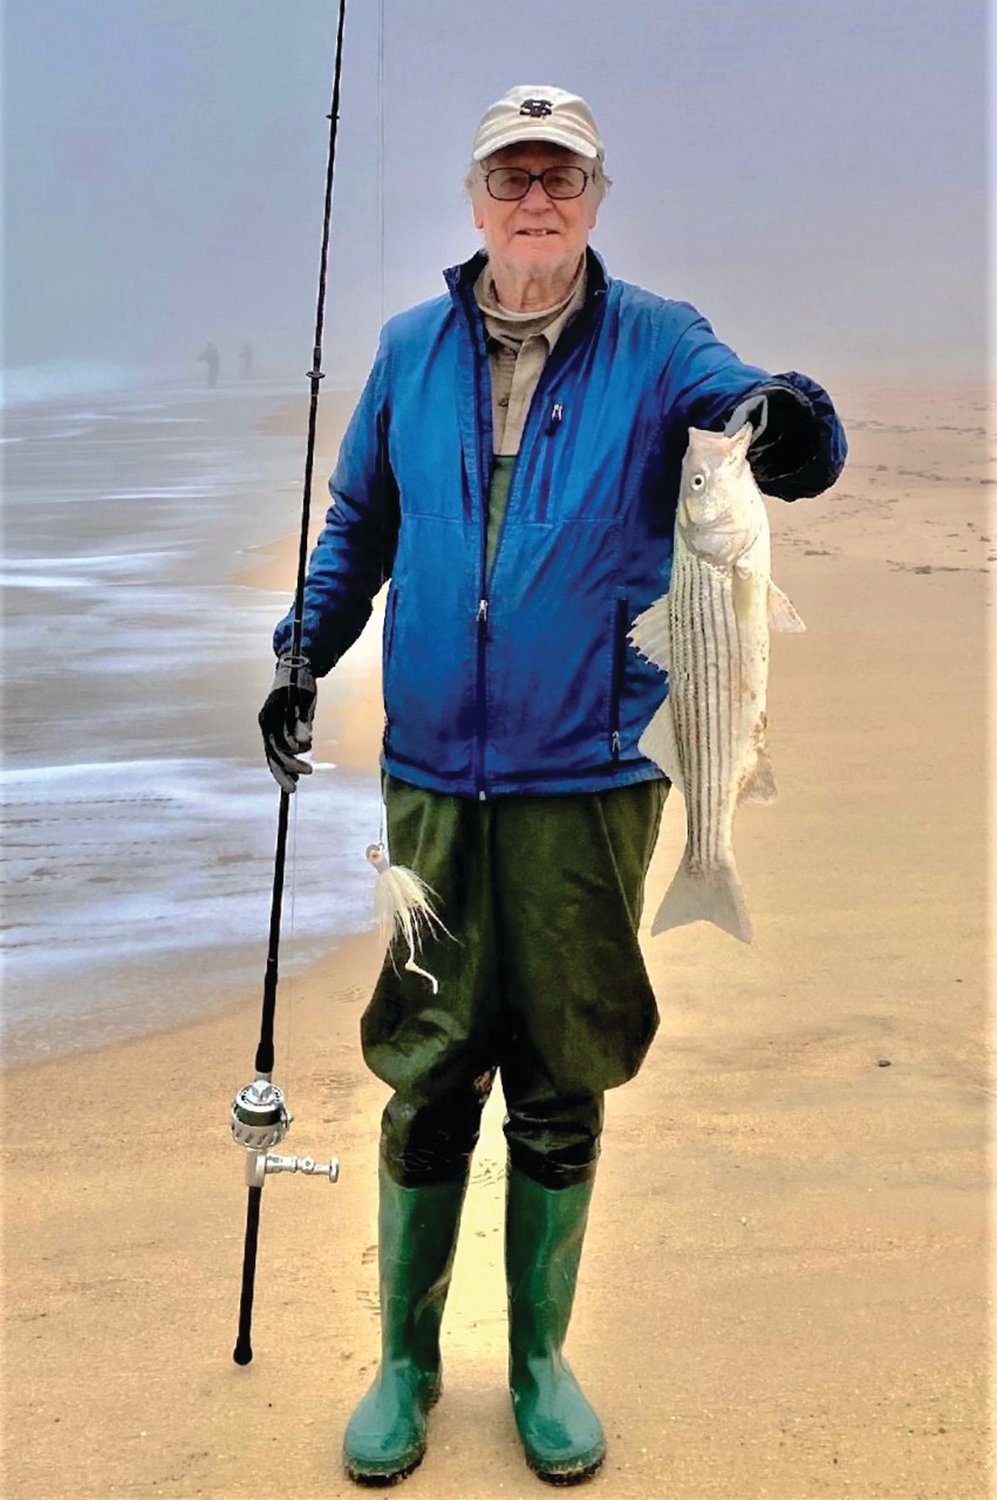 STRIPED BASS: Angler Gil Bell with a striped bass caught on a foggy South County beach.